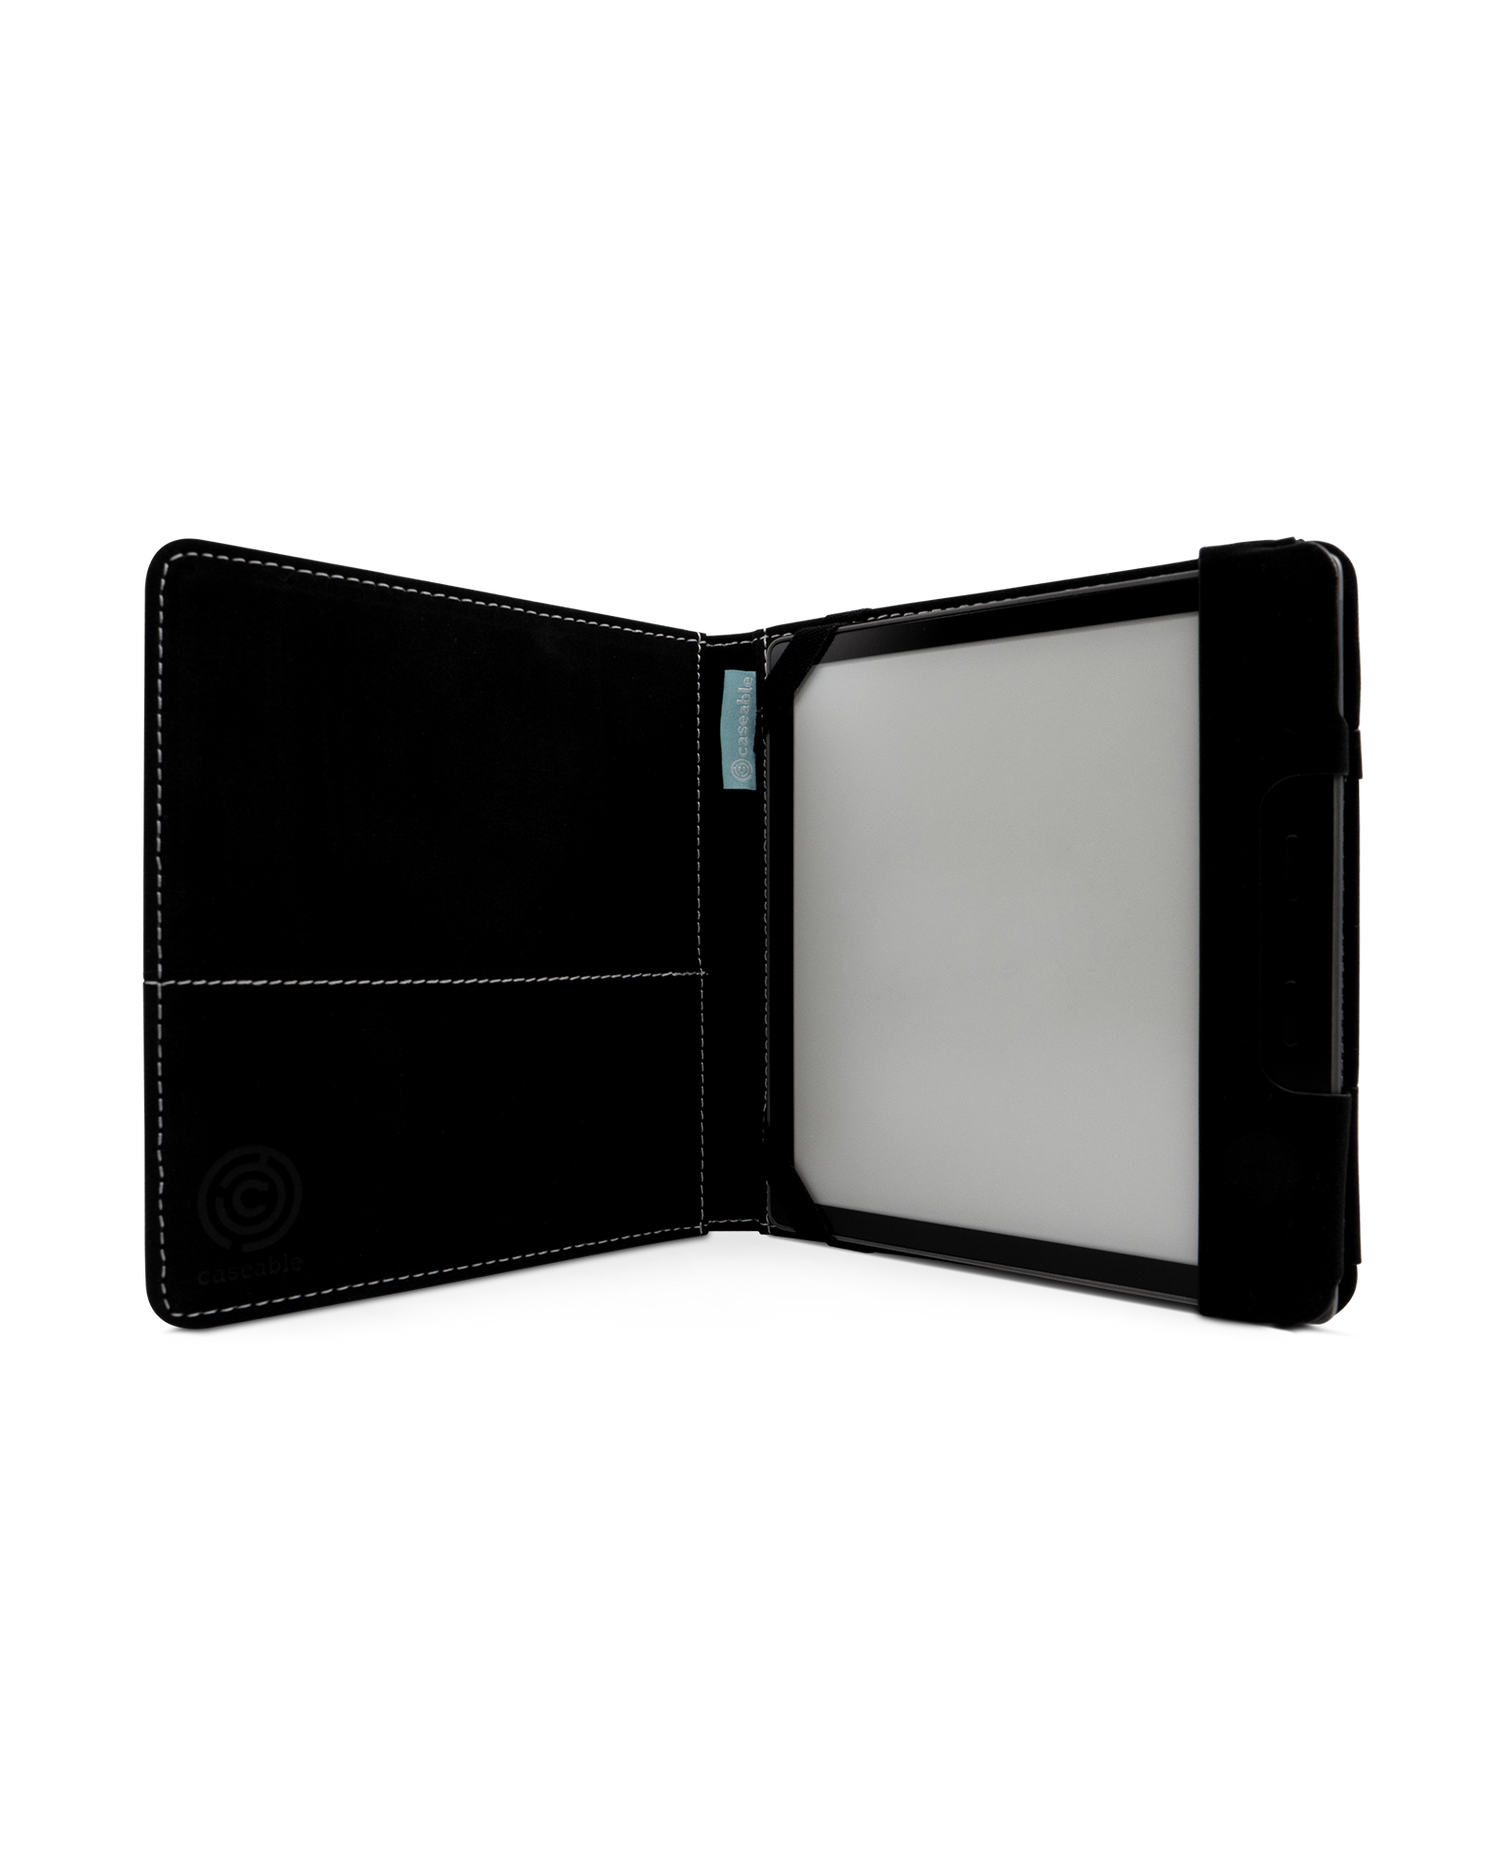 This Is Us eReader Case for tolino vision 6: Opened interior view